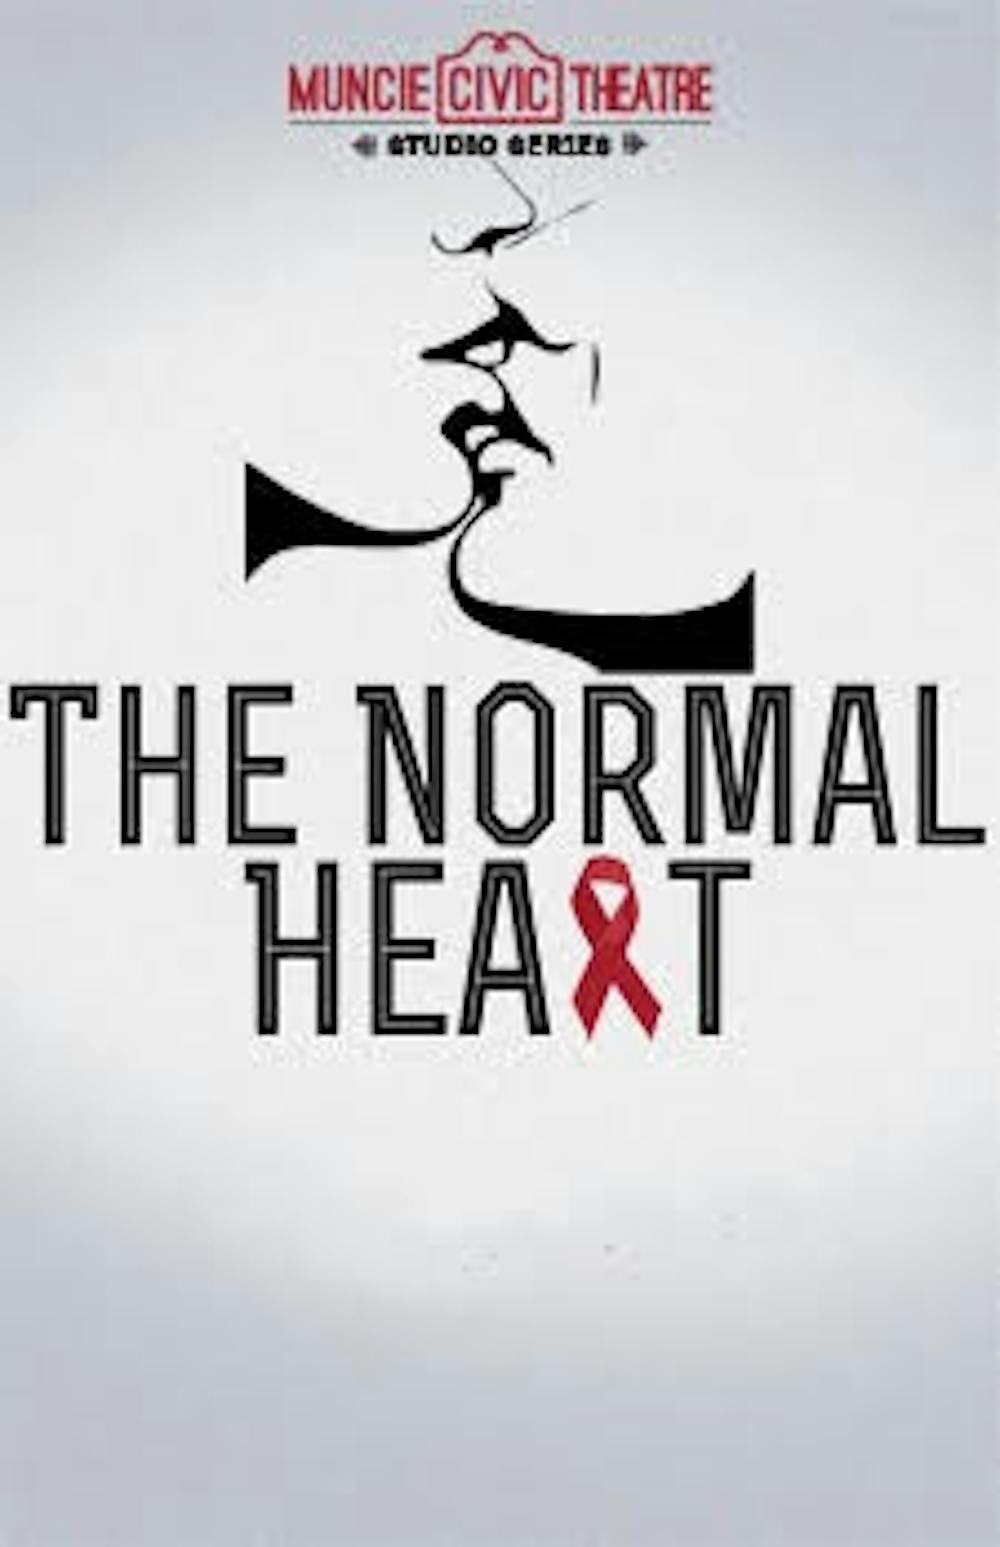 "The Normal Heart" updates story of AIDS struggle in 1980s